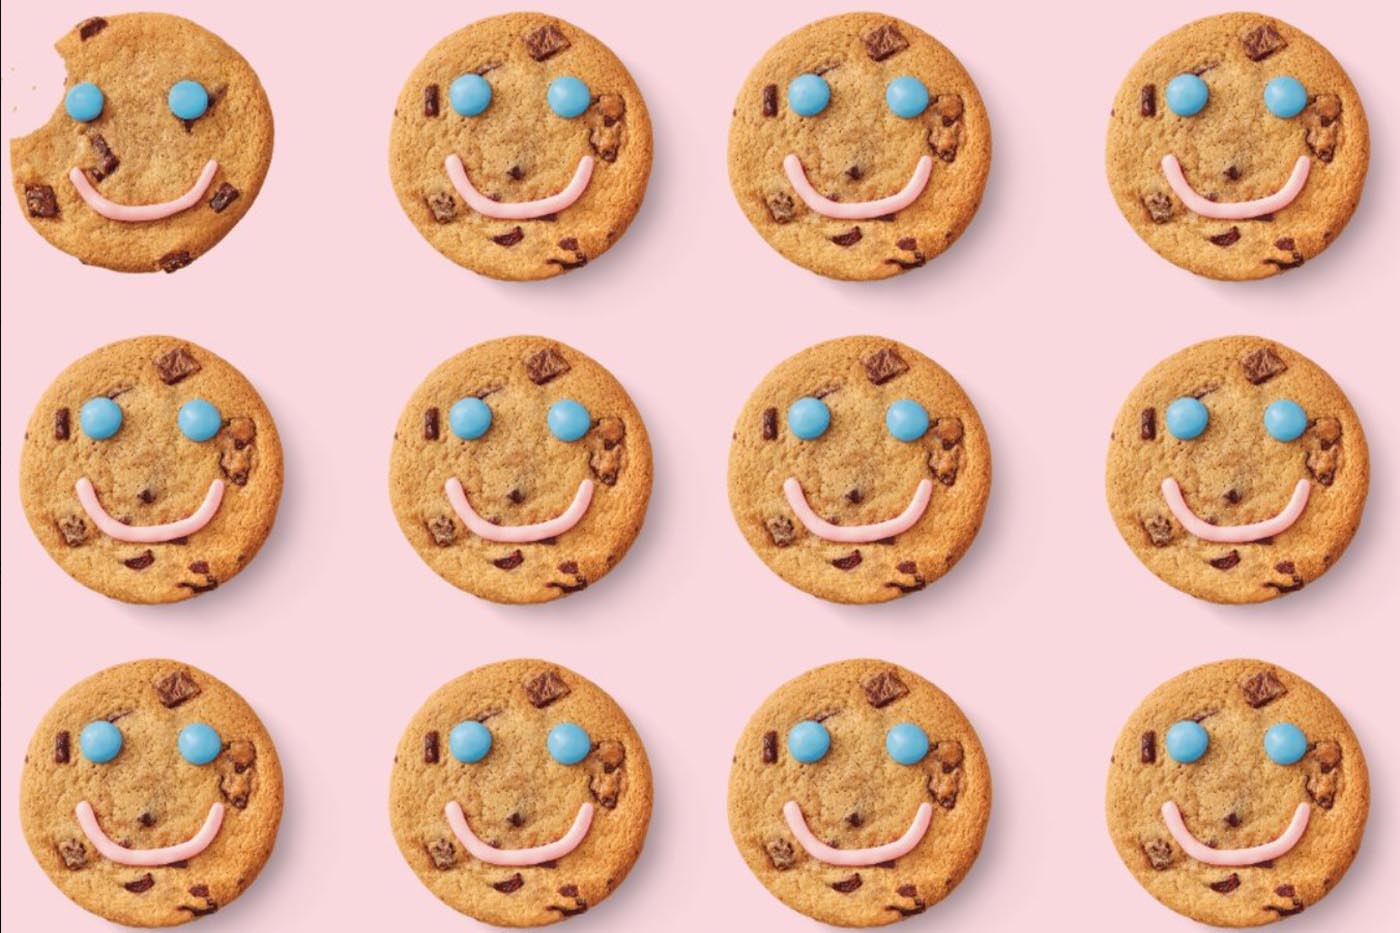 Smile cookies are coming back at Tim Hortons CEKAN